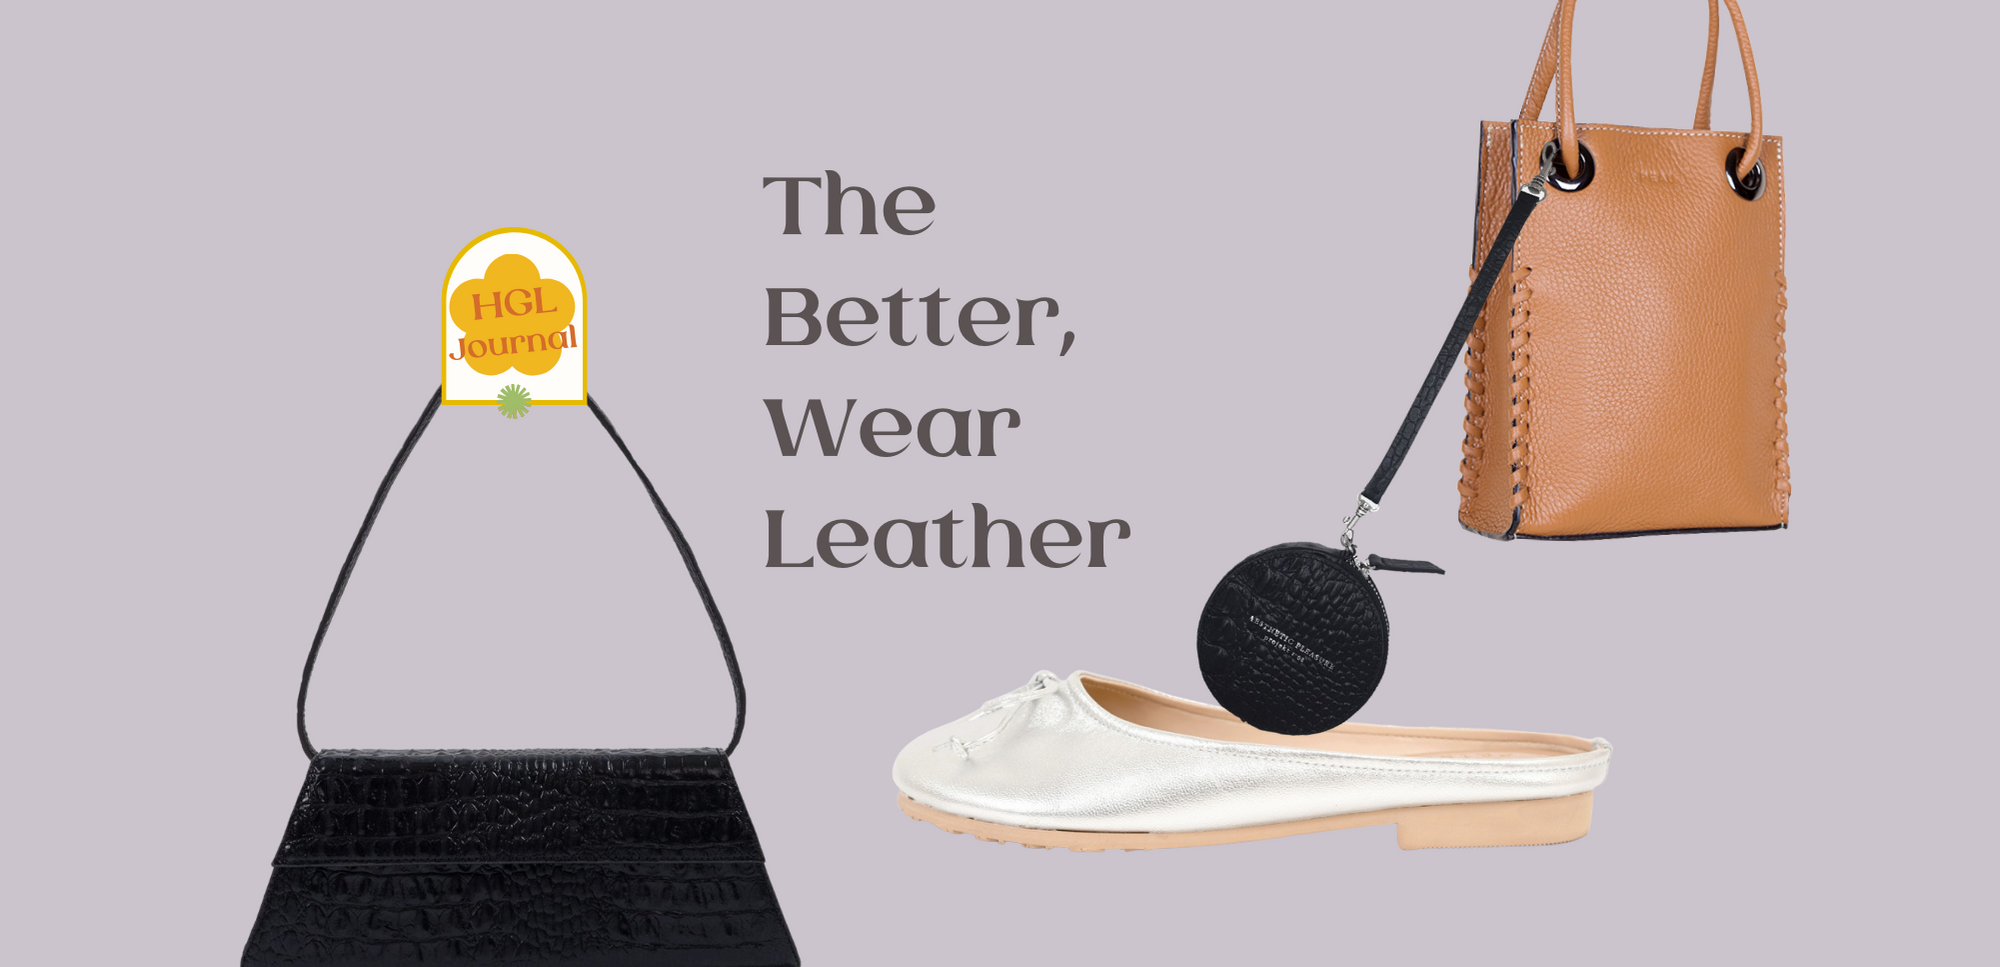 The Better, Wear Leather!